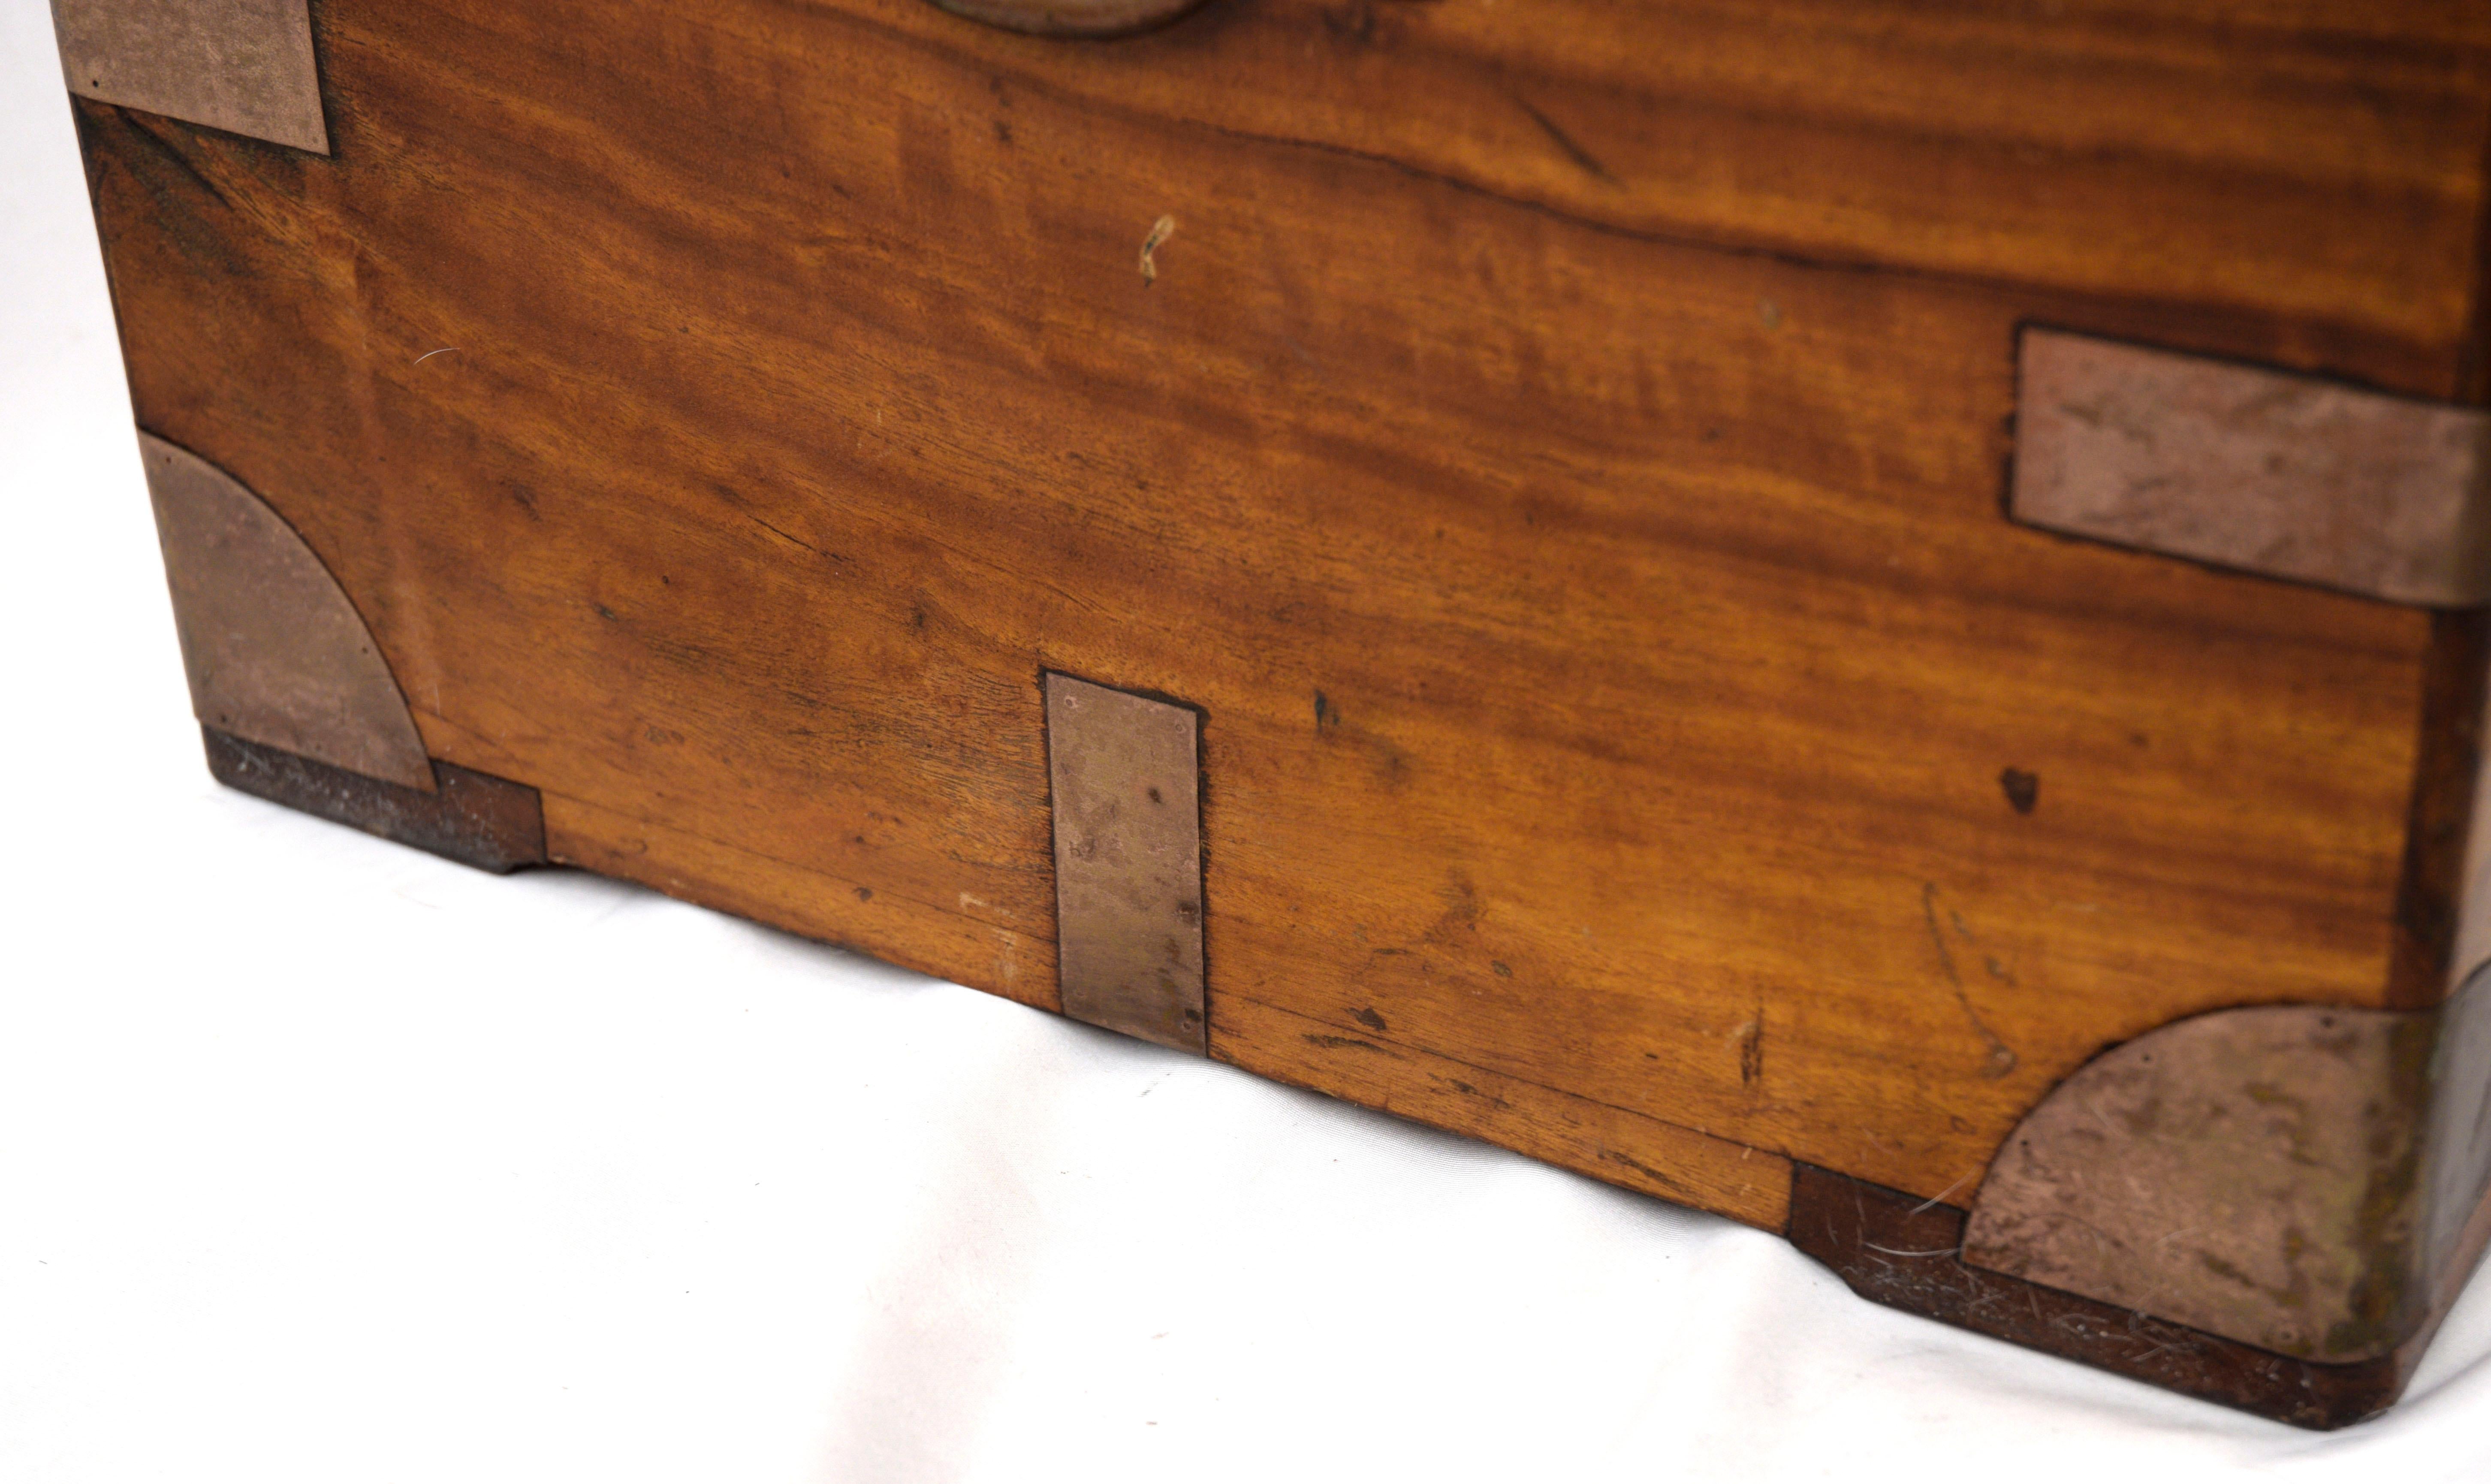 Camphorwood Campaign Chest - Late 19th Century Chinese Export Case (Medium) For Sale 2